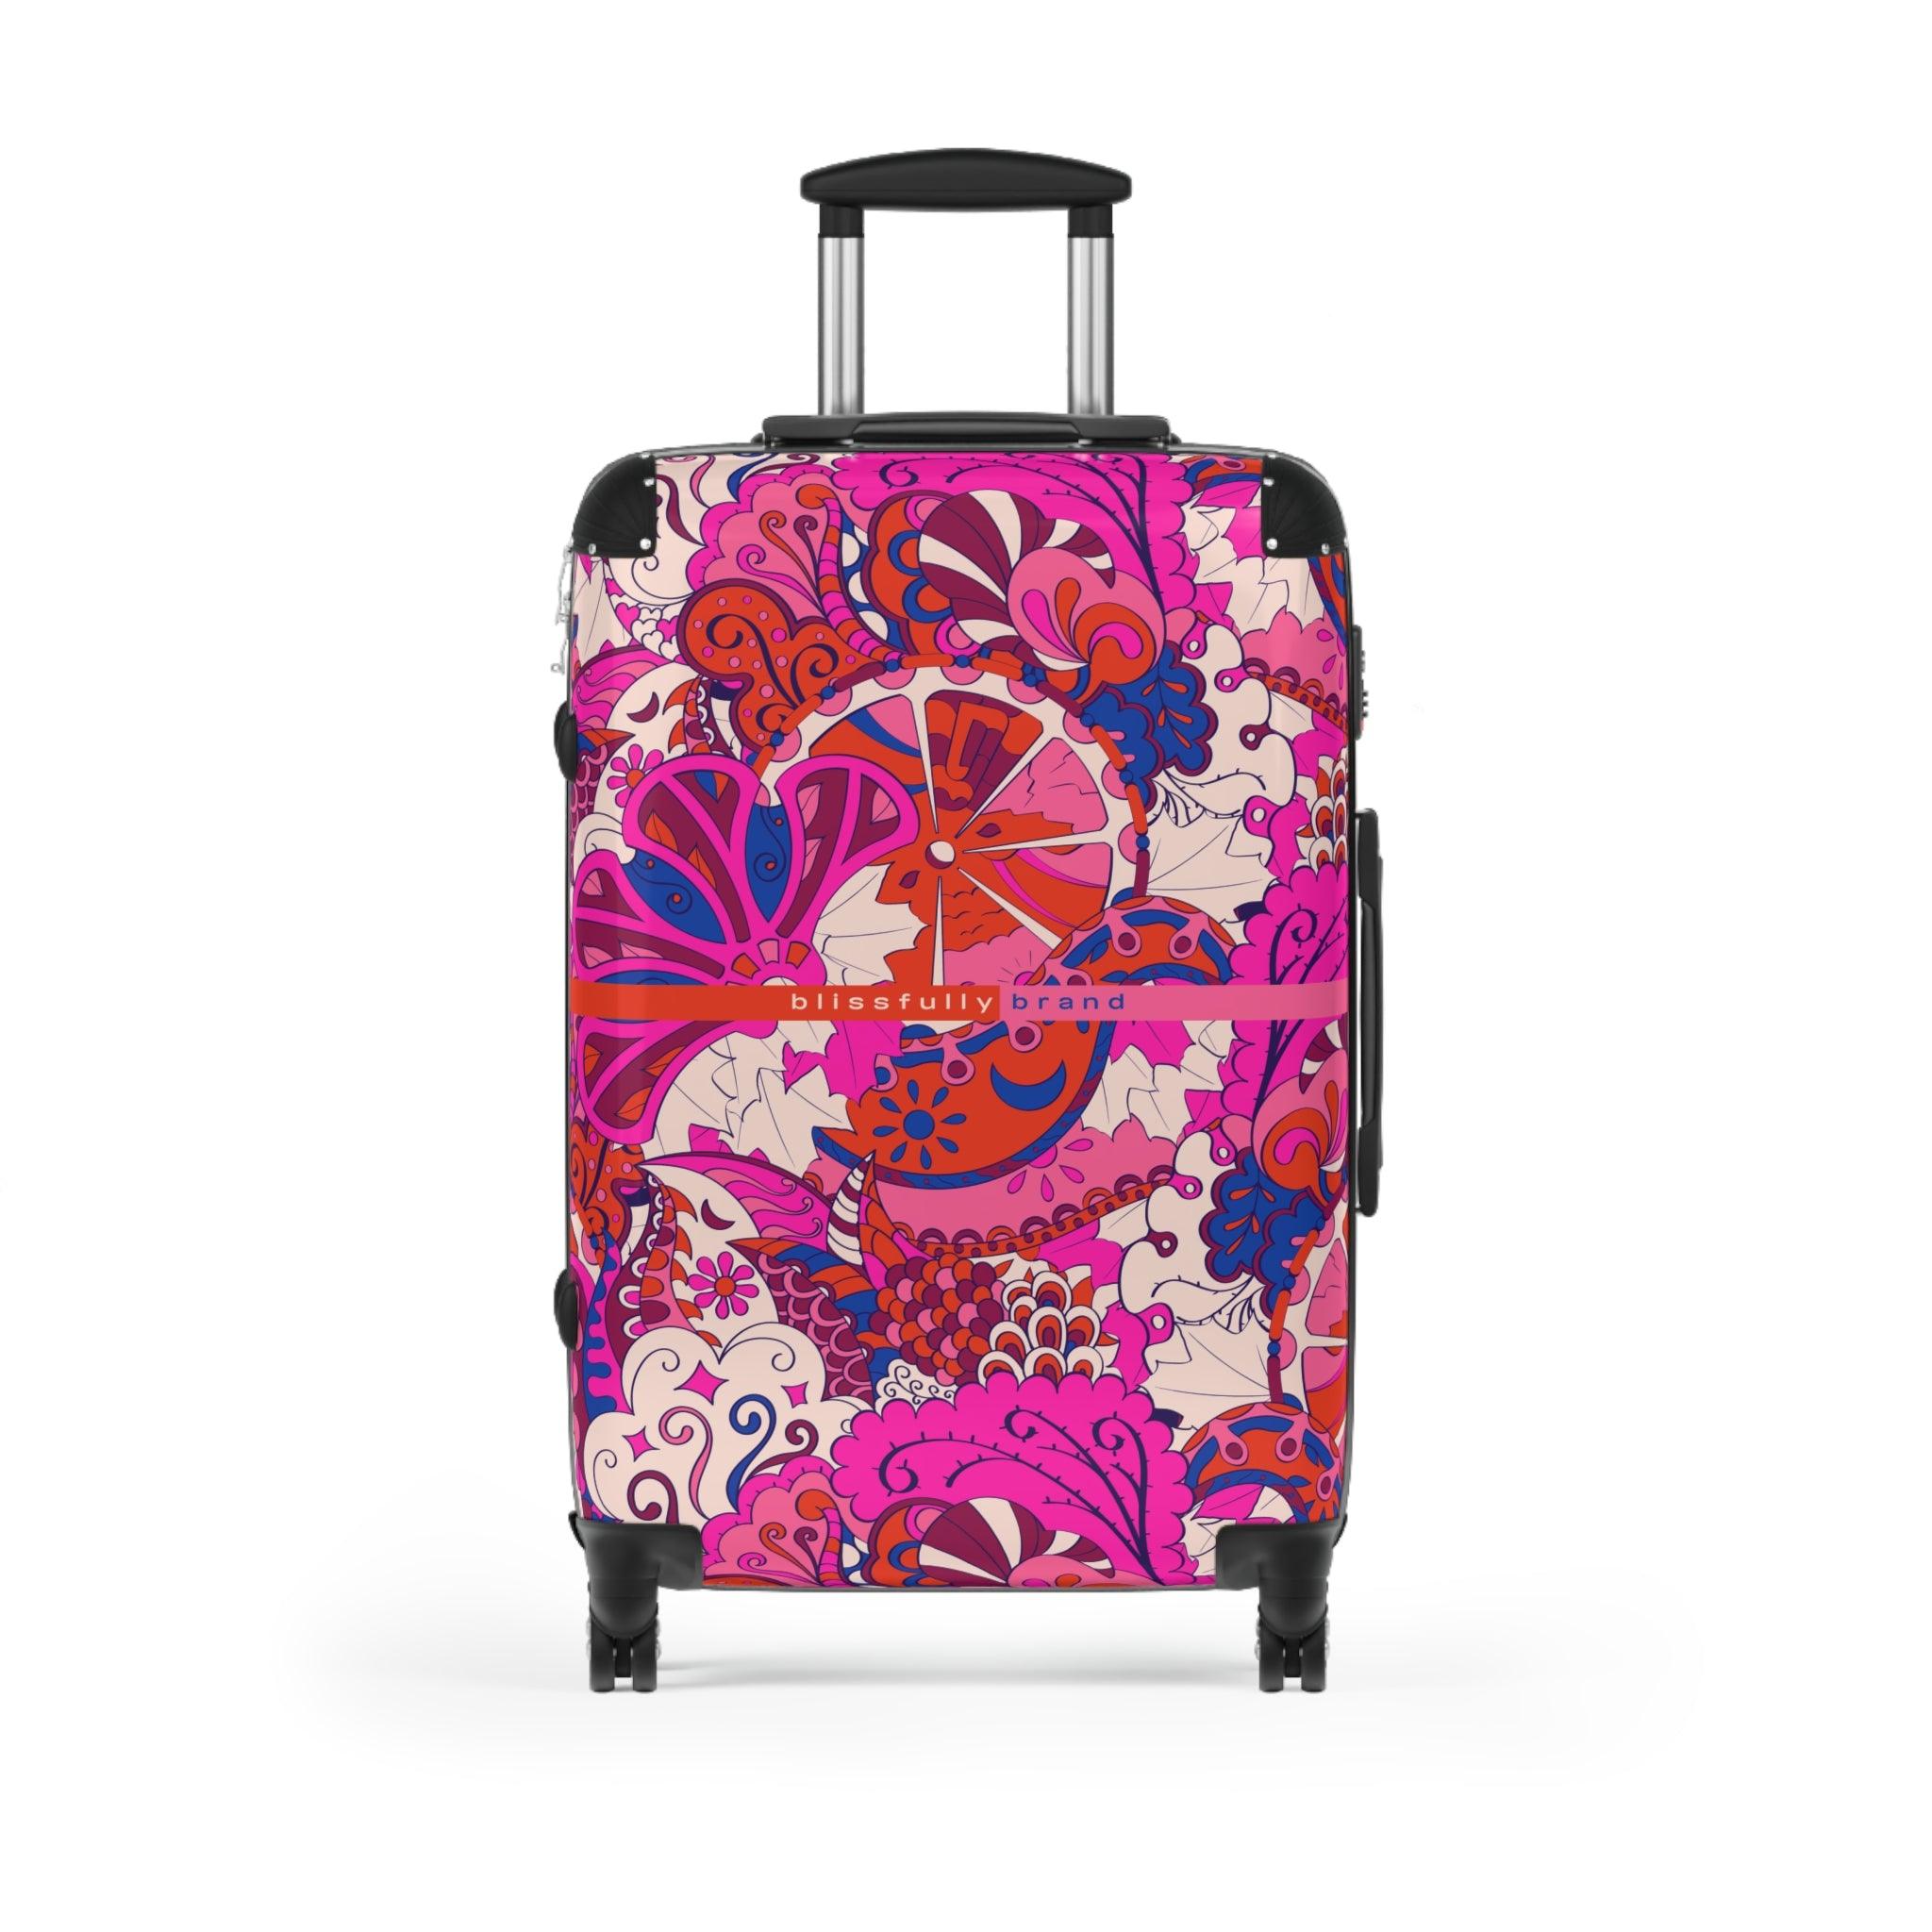 Sameria Luggage Collection - Abstract Kaleidoscope Paisley Floral Print Psychedelic Retro Swirls Funky Multicolor Check in Carry On Roller 360 Hard Shell Unique Retro Vibrant Bold Pink Red Flower Power